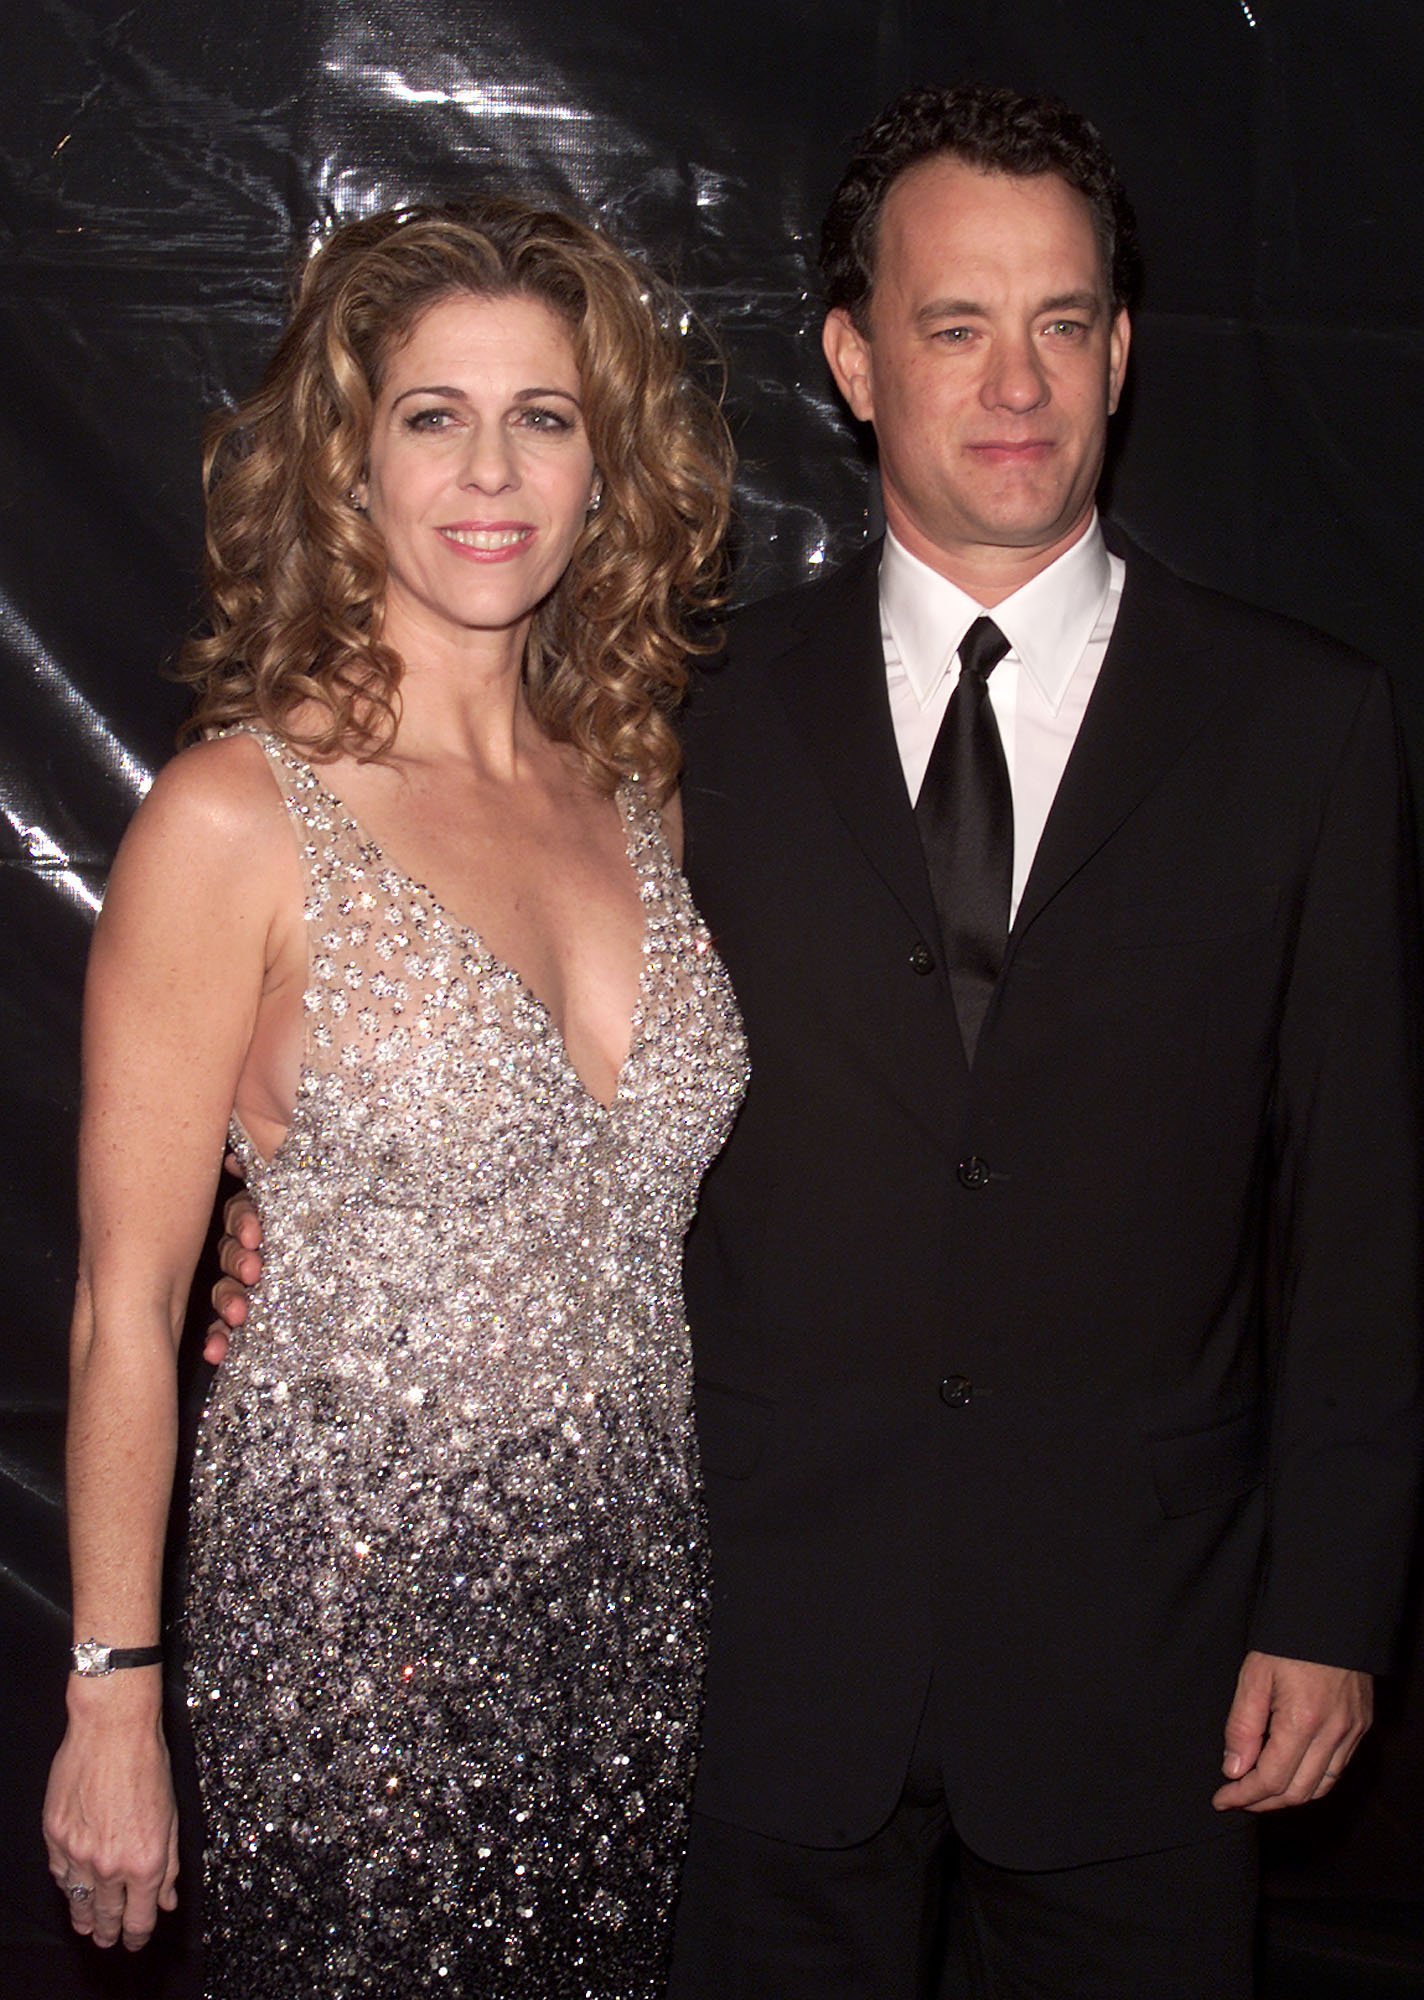 Tom Hanks and Rita Wilson attend the Valentino 40th Anniversary in Los Angeles on November 17, 2000 | Photo: Getty Images